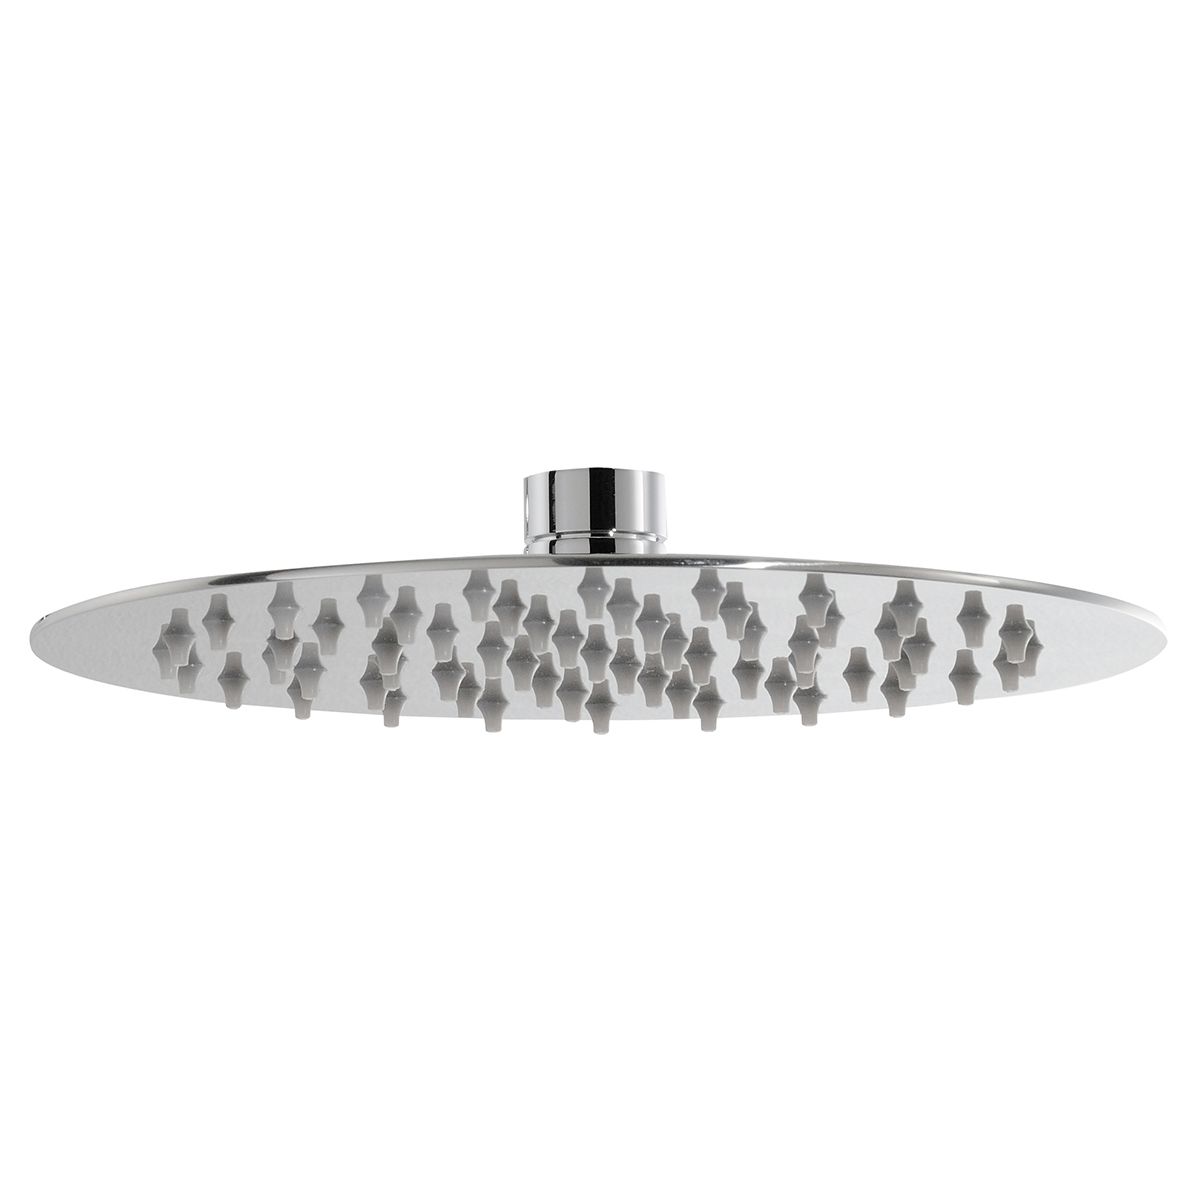 Abode Storm Slimline 3mm Circular Showerhead in Polished Stainless Steel